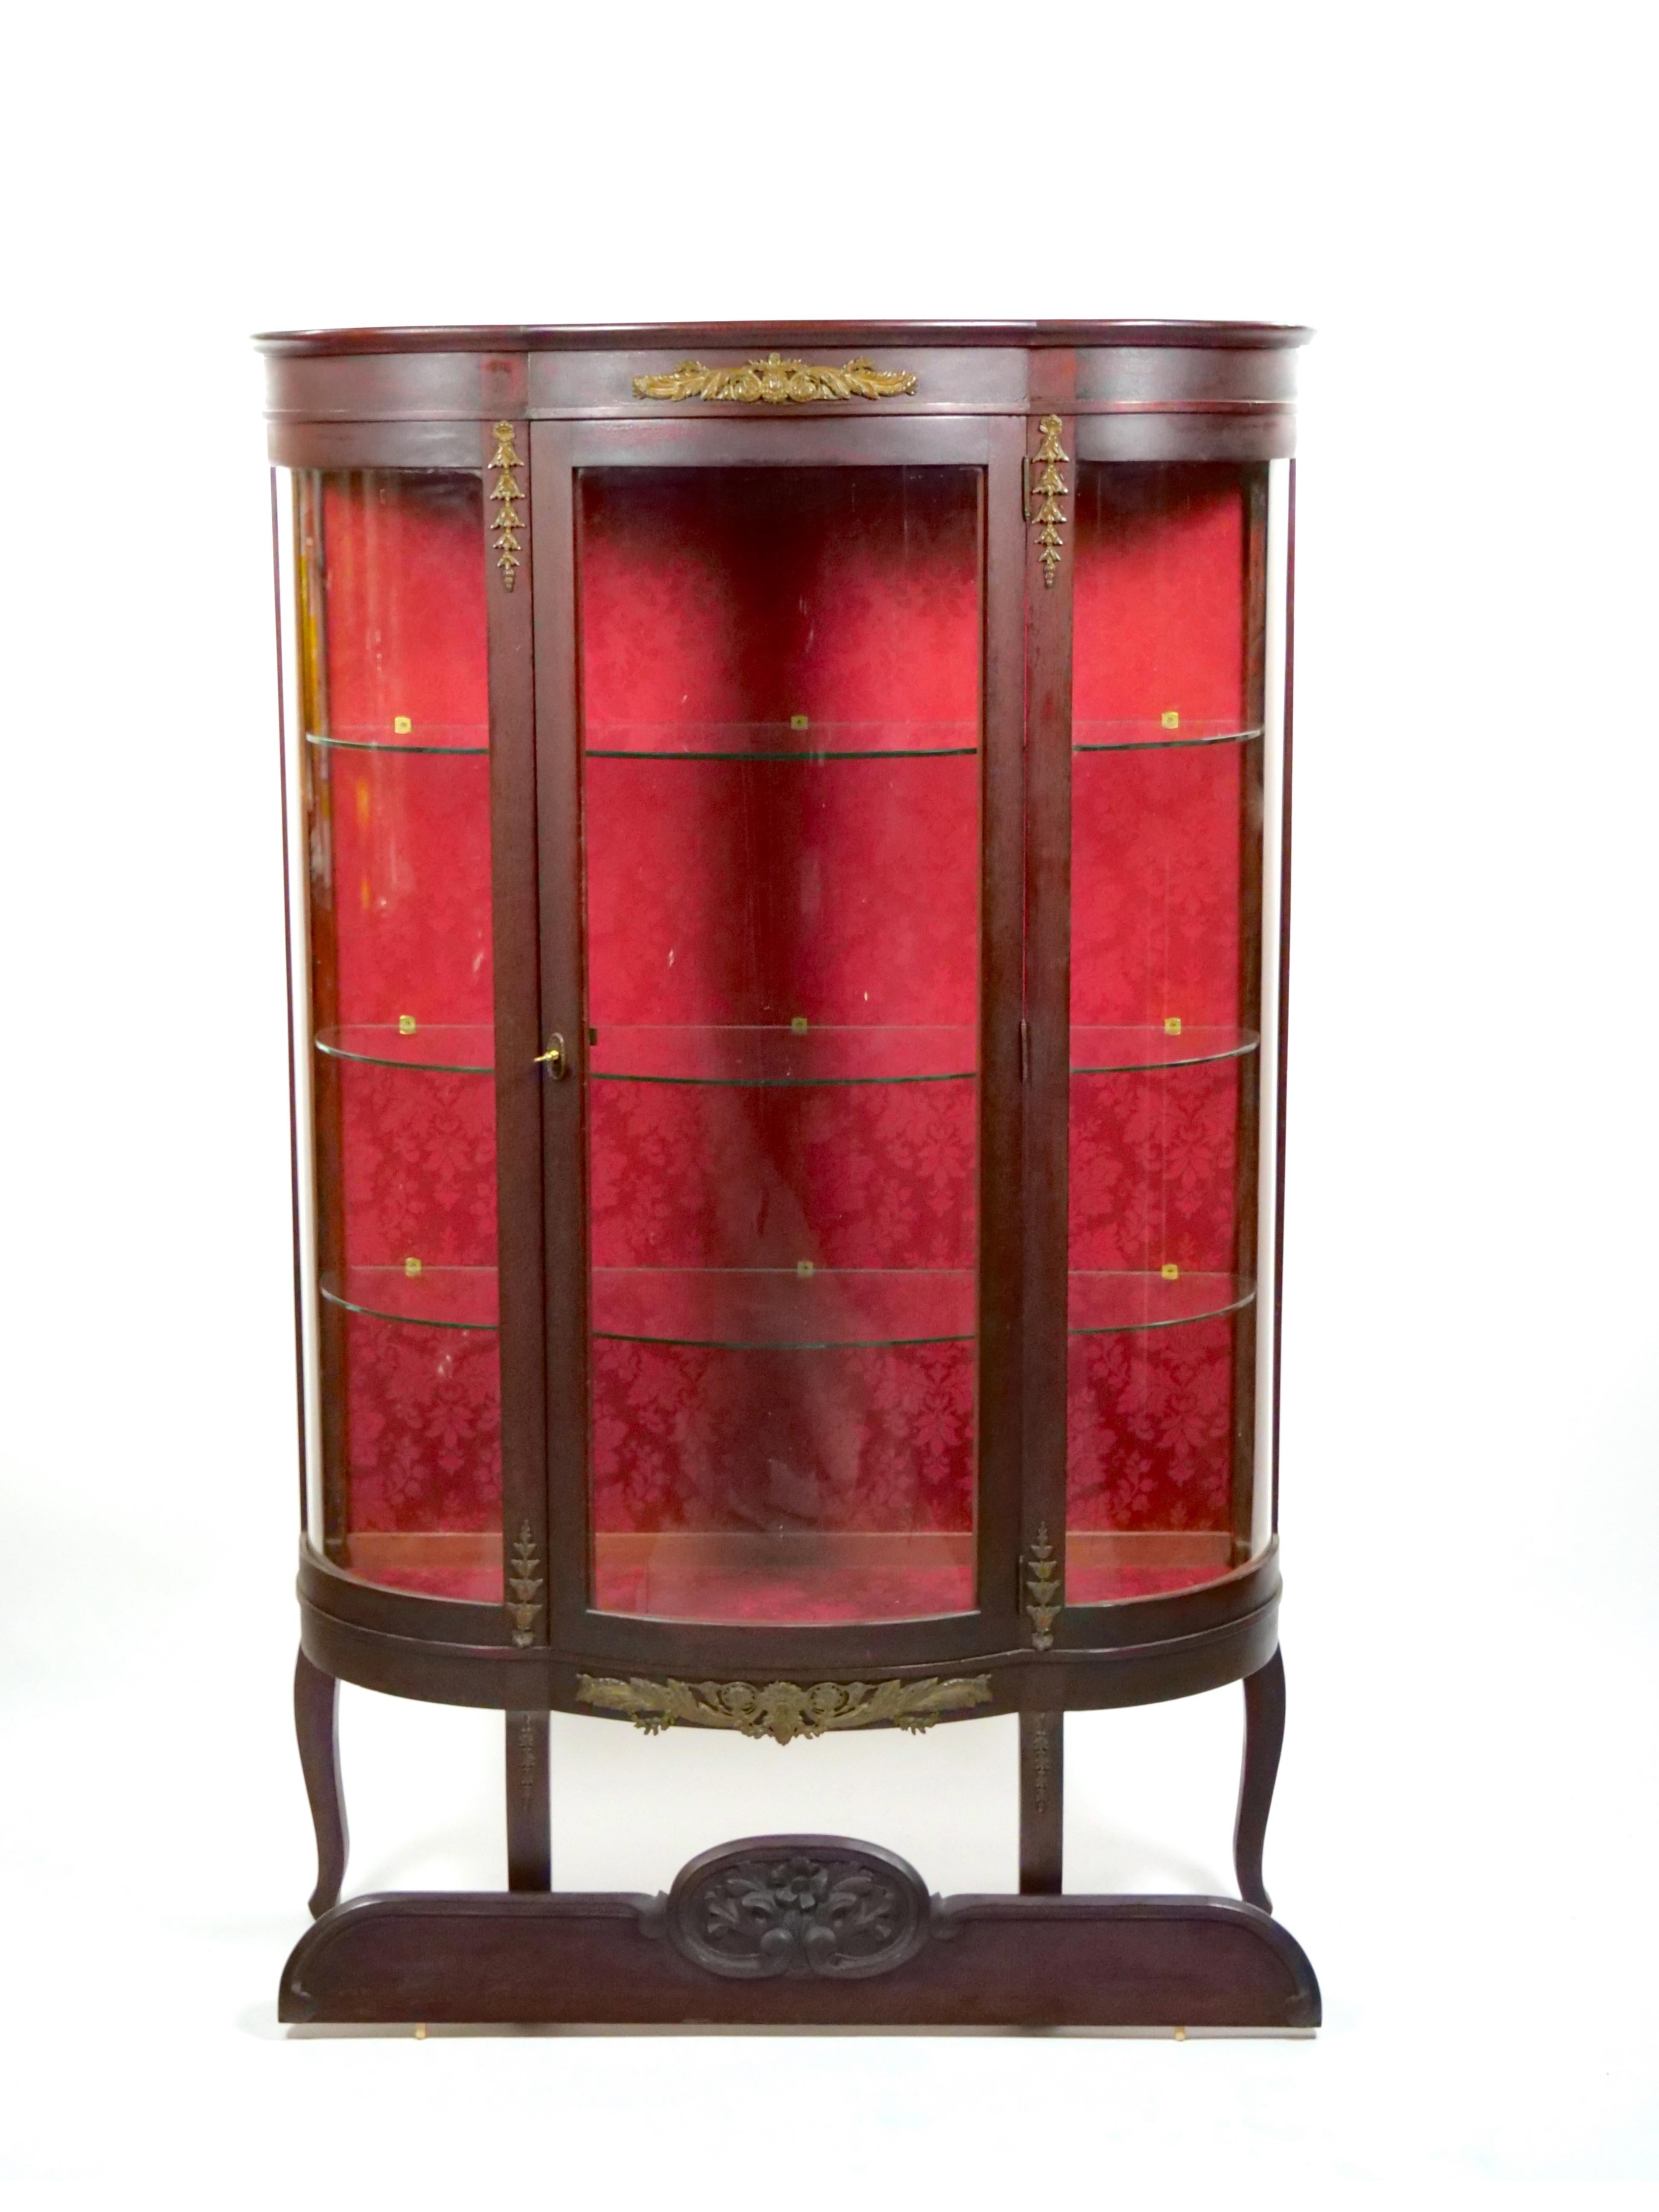 
Embrace the timeless allure of our antique demilune-shaped vitrine and china cabinet, Beautifully finished in a warm, inviting red stain. This exquisite piece showcases an array of intricate details, from the graceful foliate motifs to the ornate